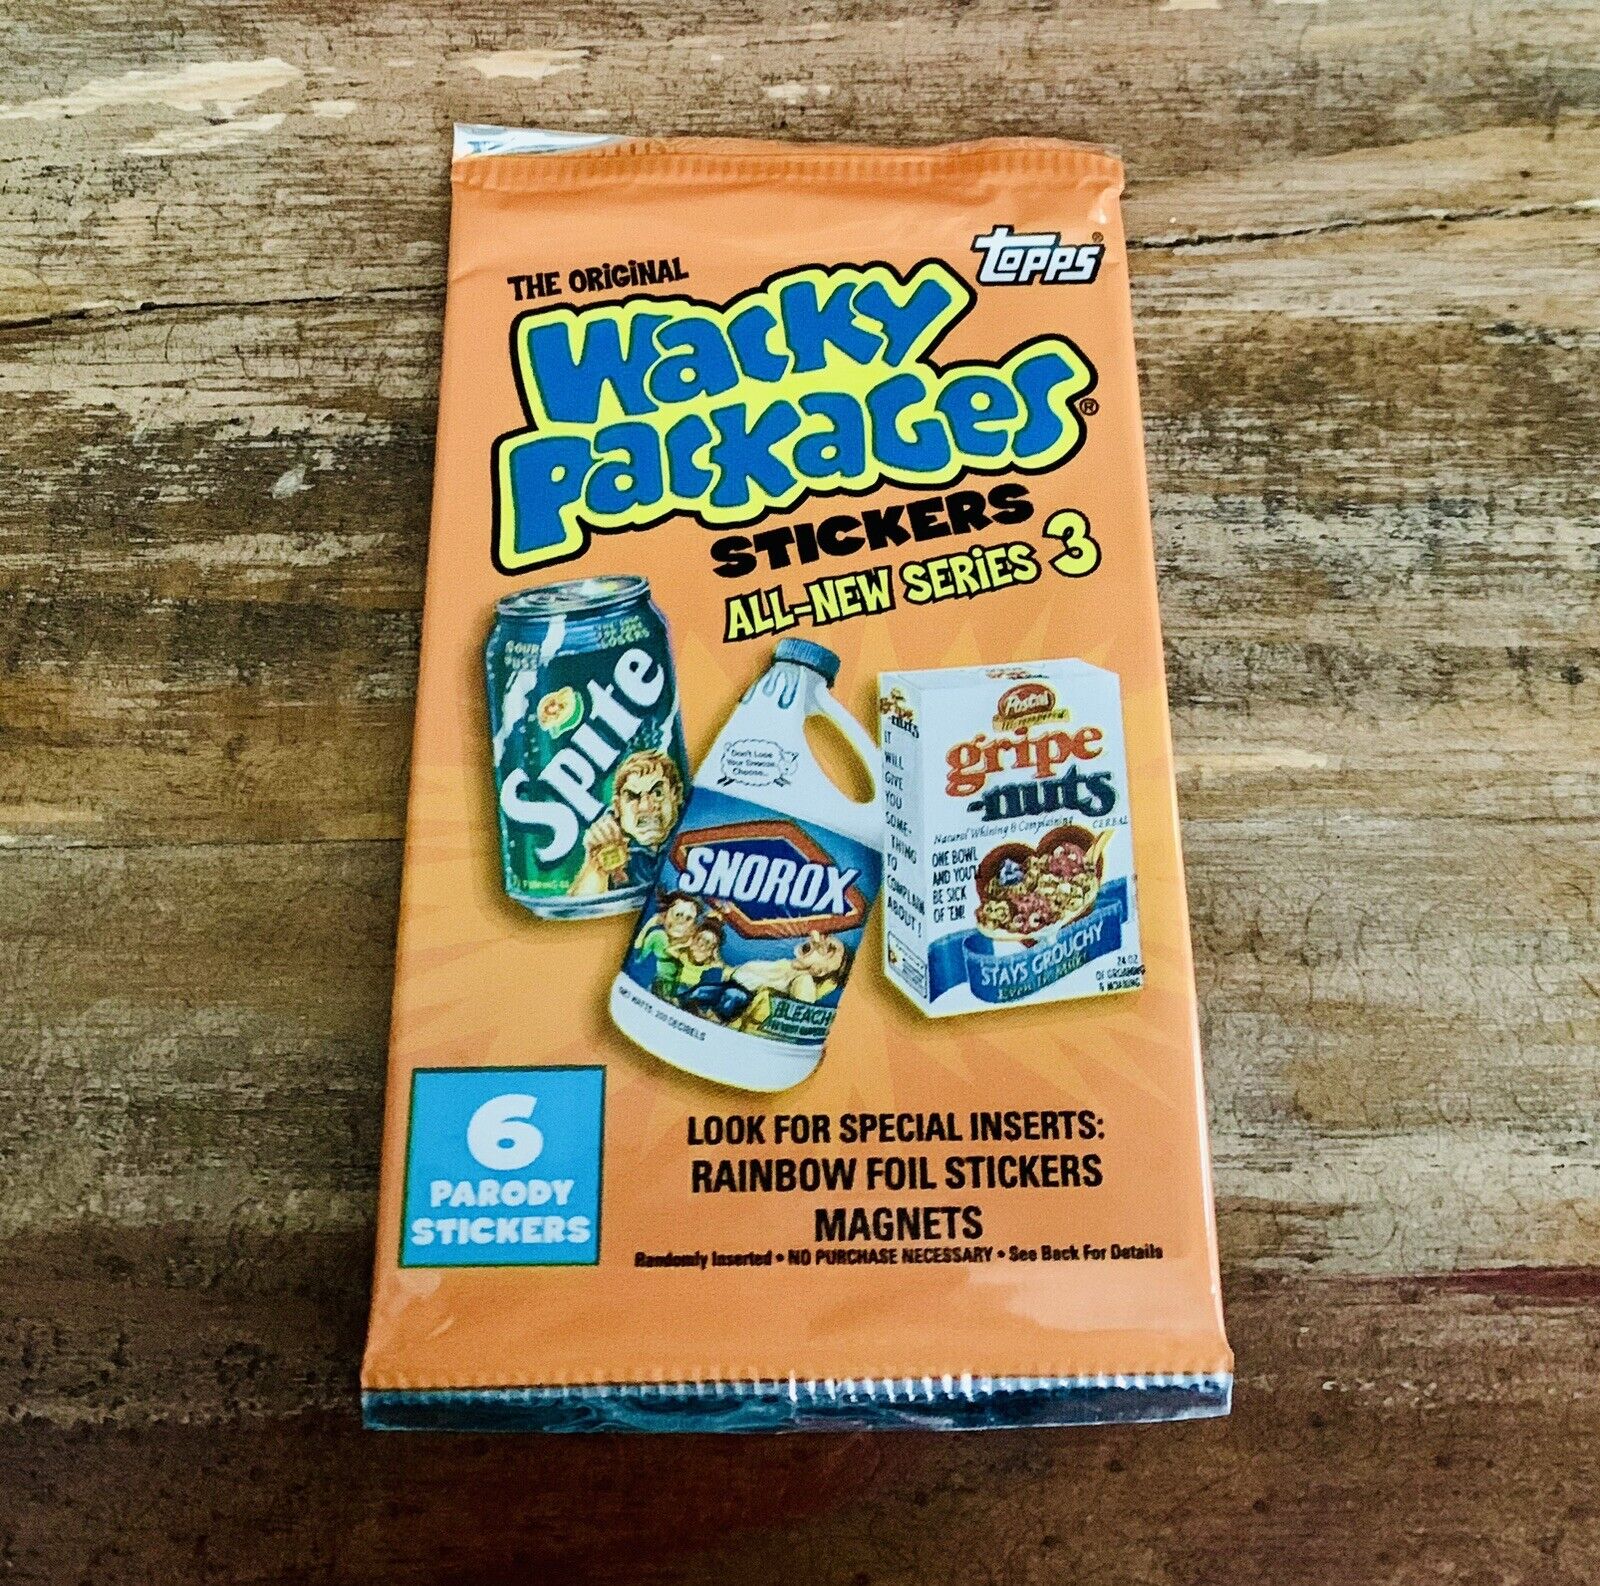 2006 TOPPS WACKY PACKAGES ALL-NEW SERIES 3 SEALED STICKERS PACK